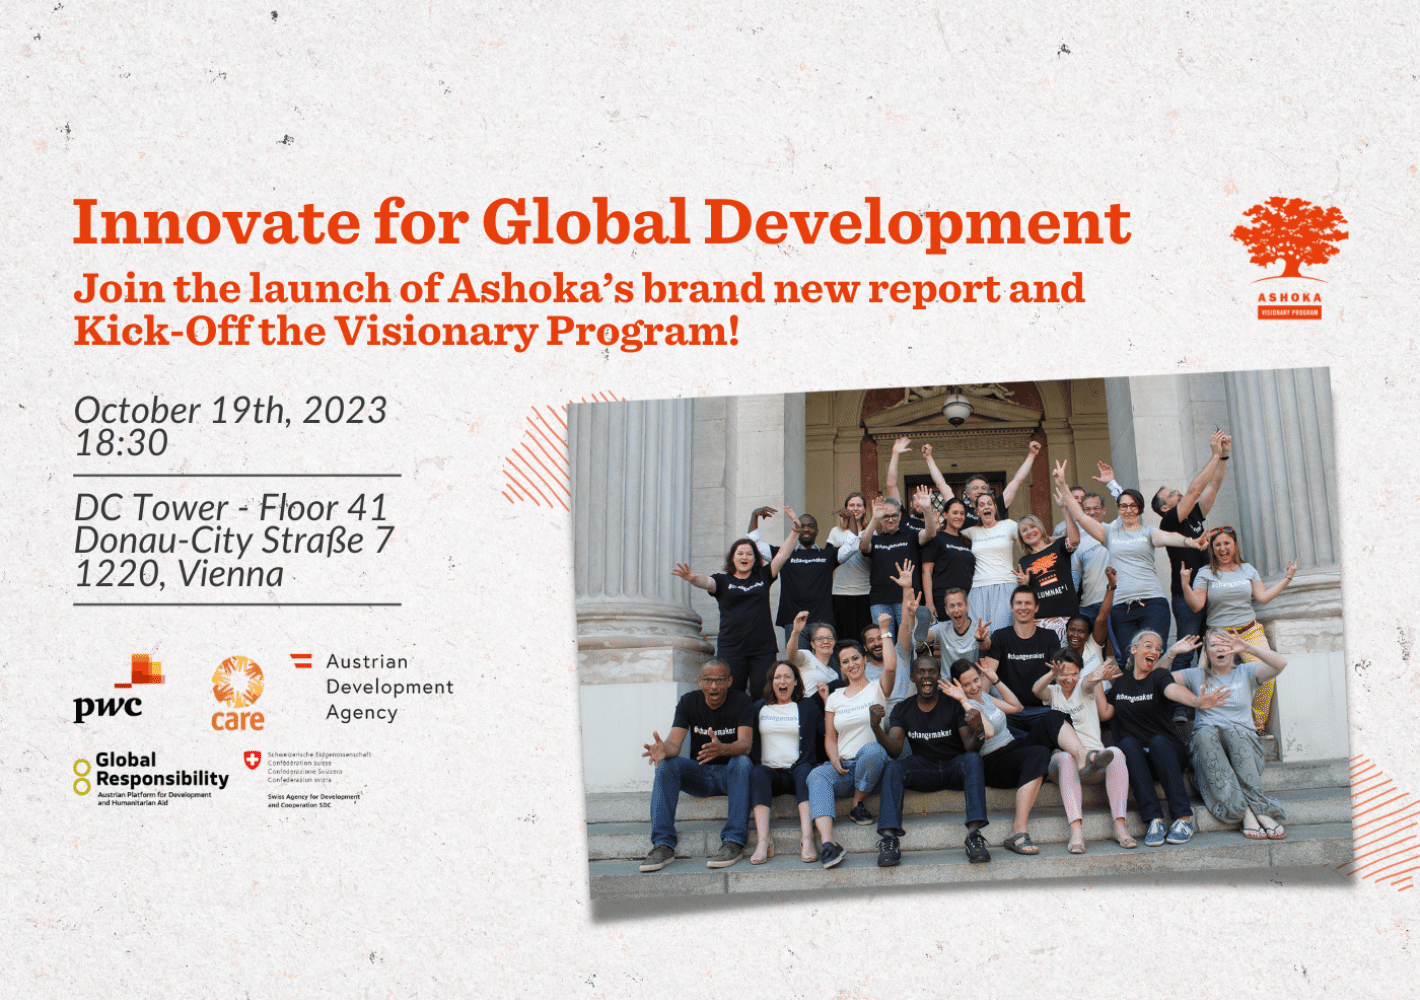 Invitation to Innovate for Global Development: New Report Launch and Kick-Off Visionary Program